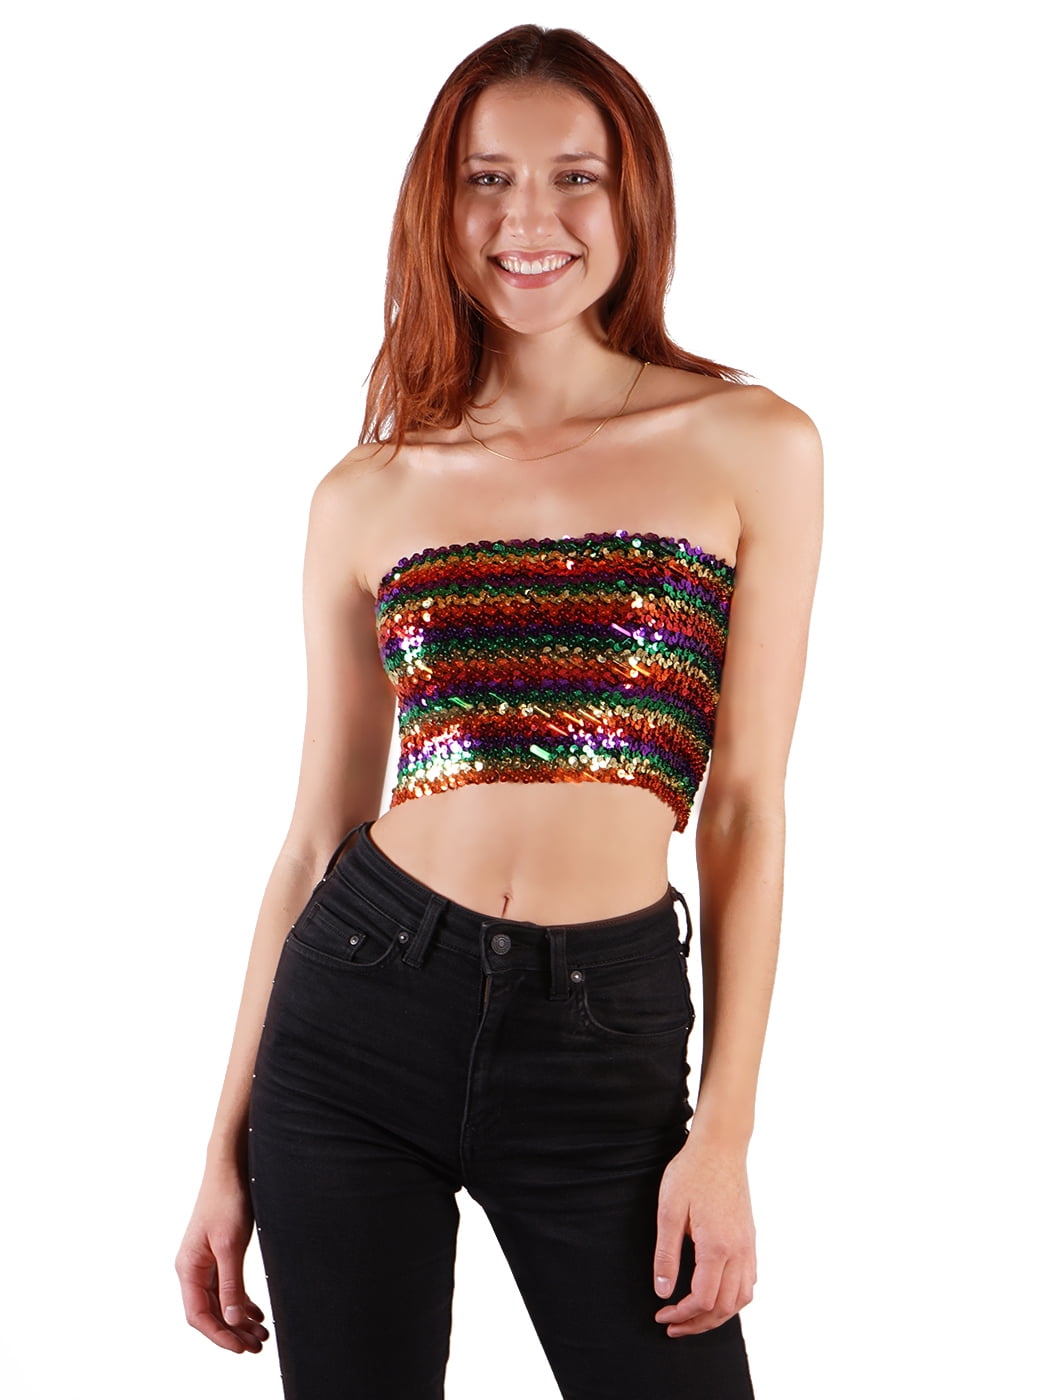 Kakaco Sequins Tube Top Stretch Bandeau Strapless Sequin Crop Top